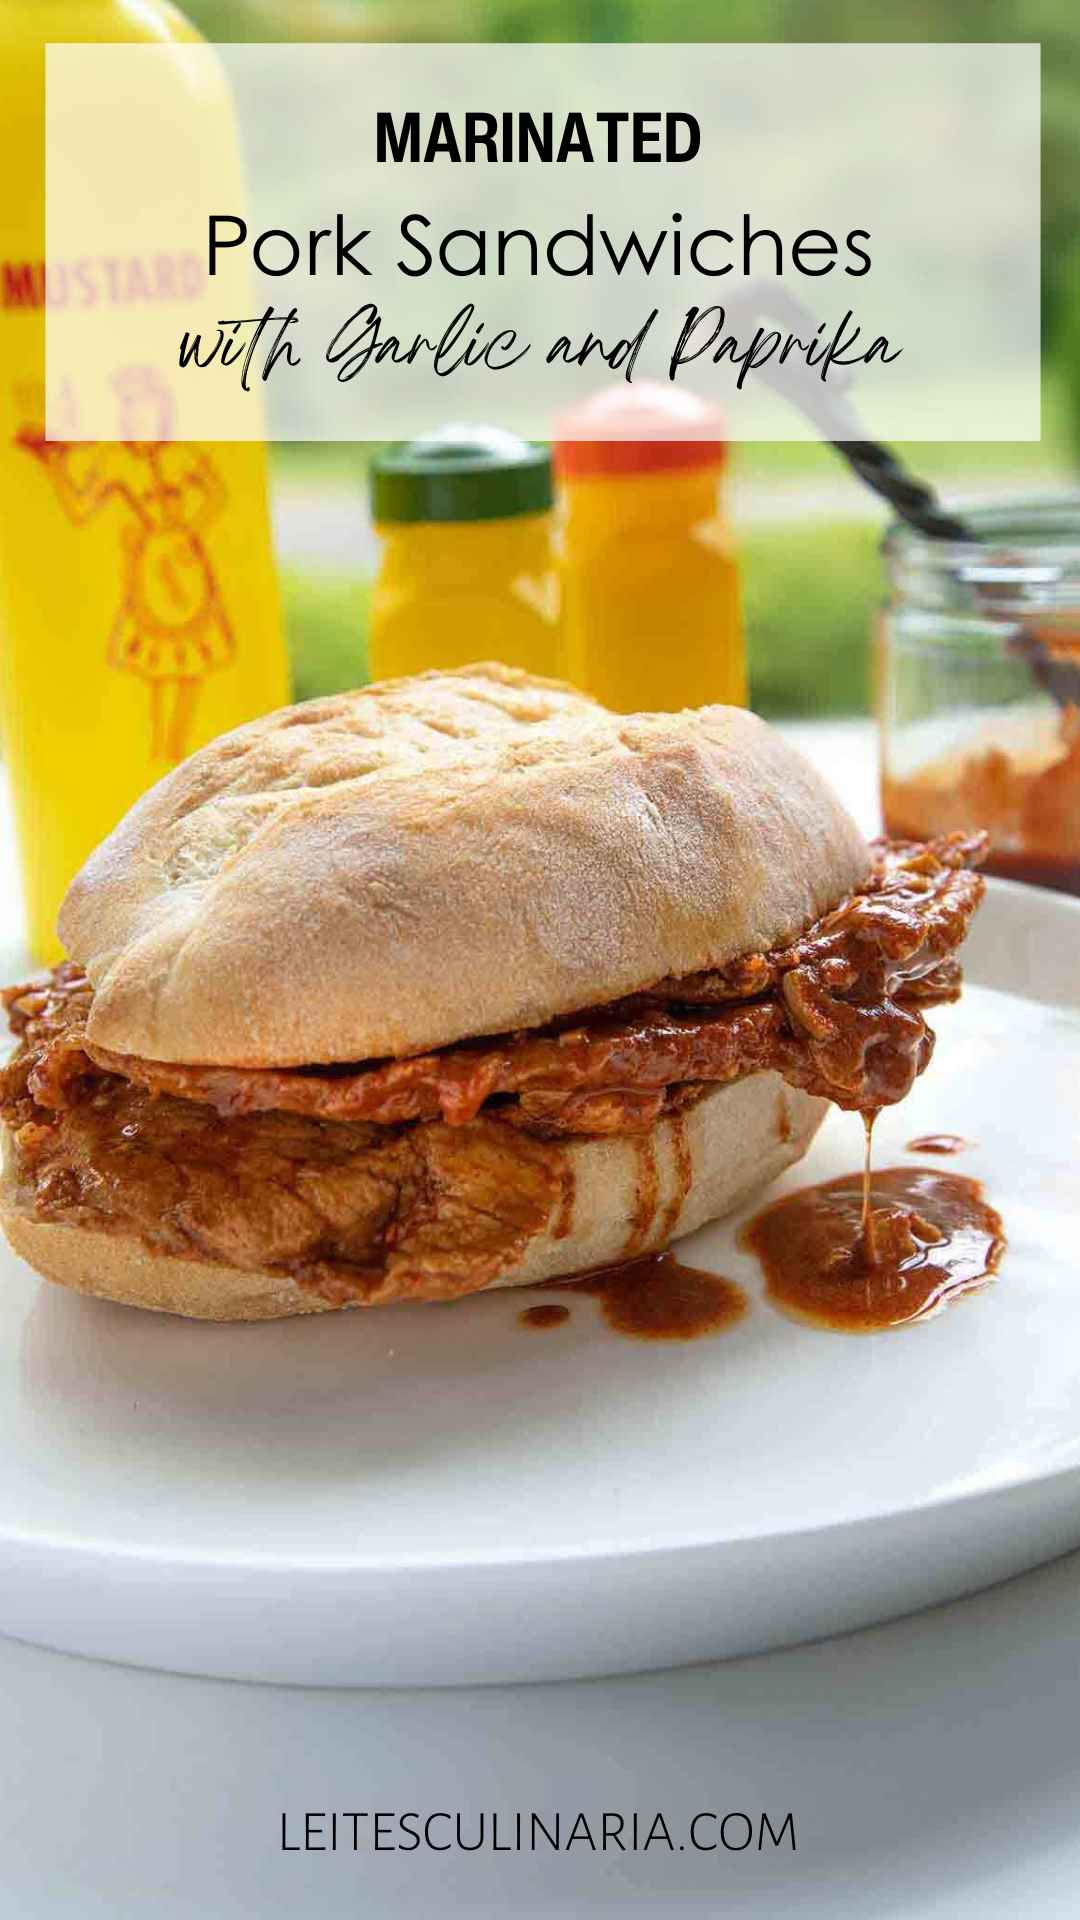 A sandwich made with a large roll, thinly sliced pork, and a paprika sauce dripping out of it on a white plate.